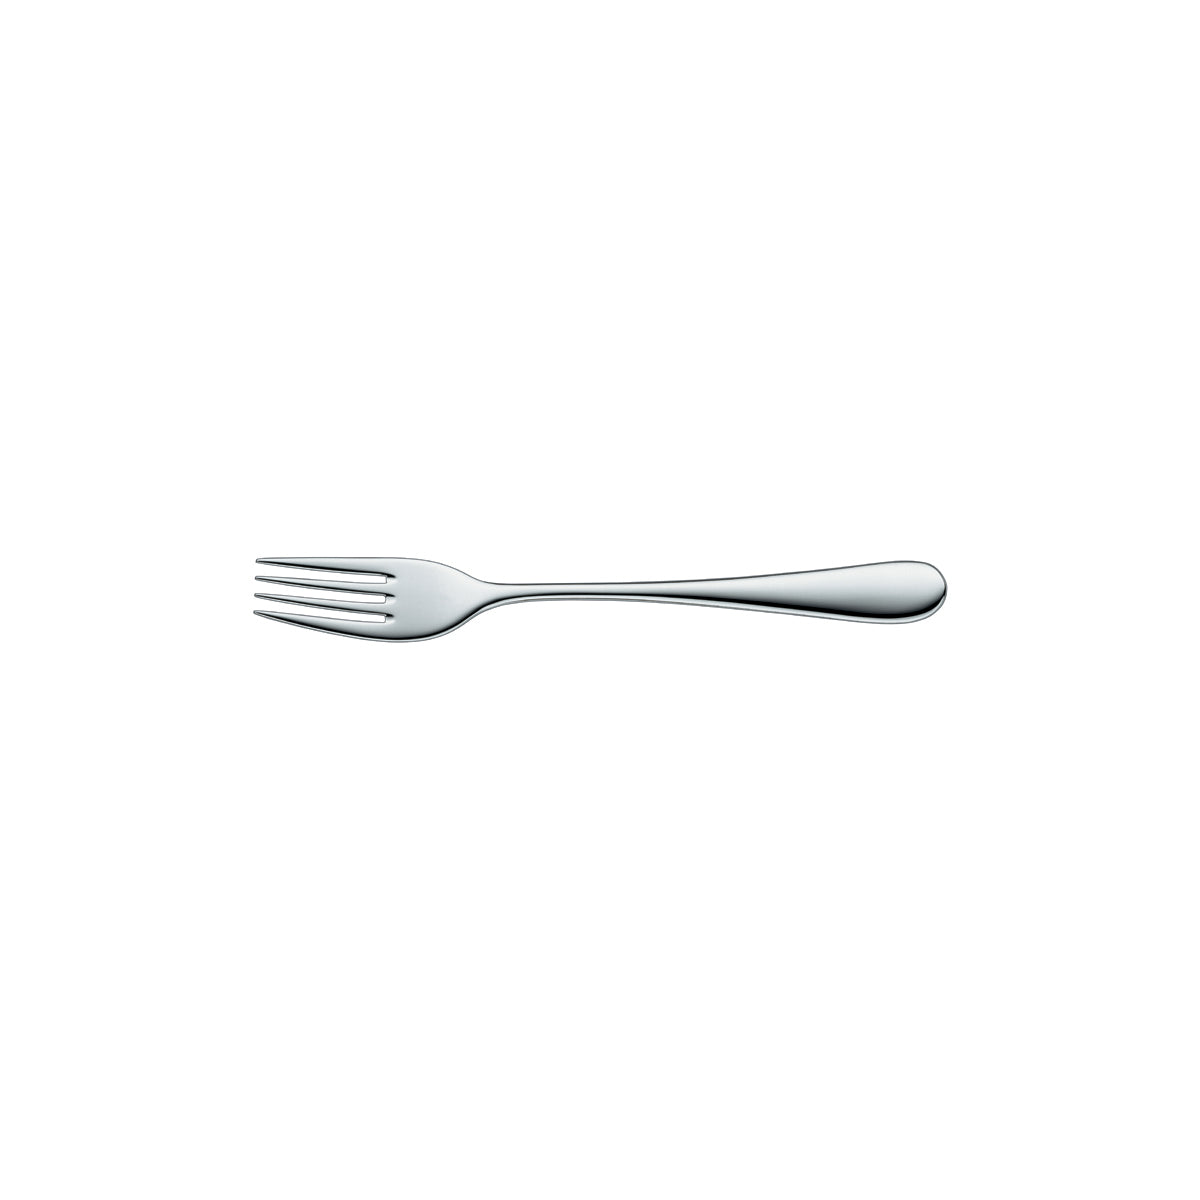 10.1902.6060 WMF Signum Table Fork Silverplated Tomkin Australia Hospitality Supplies